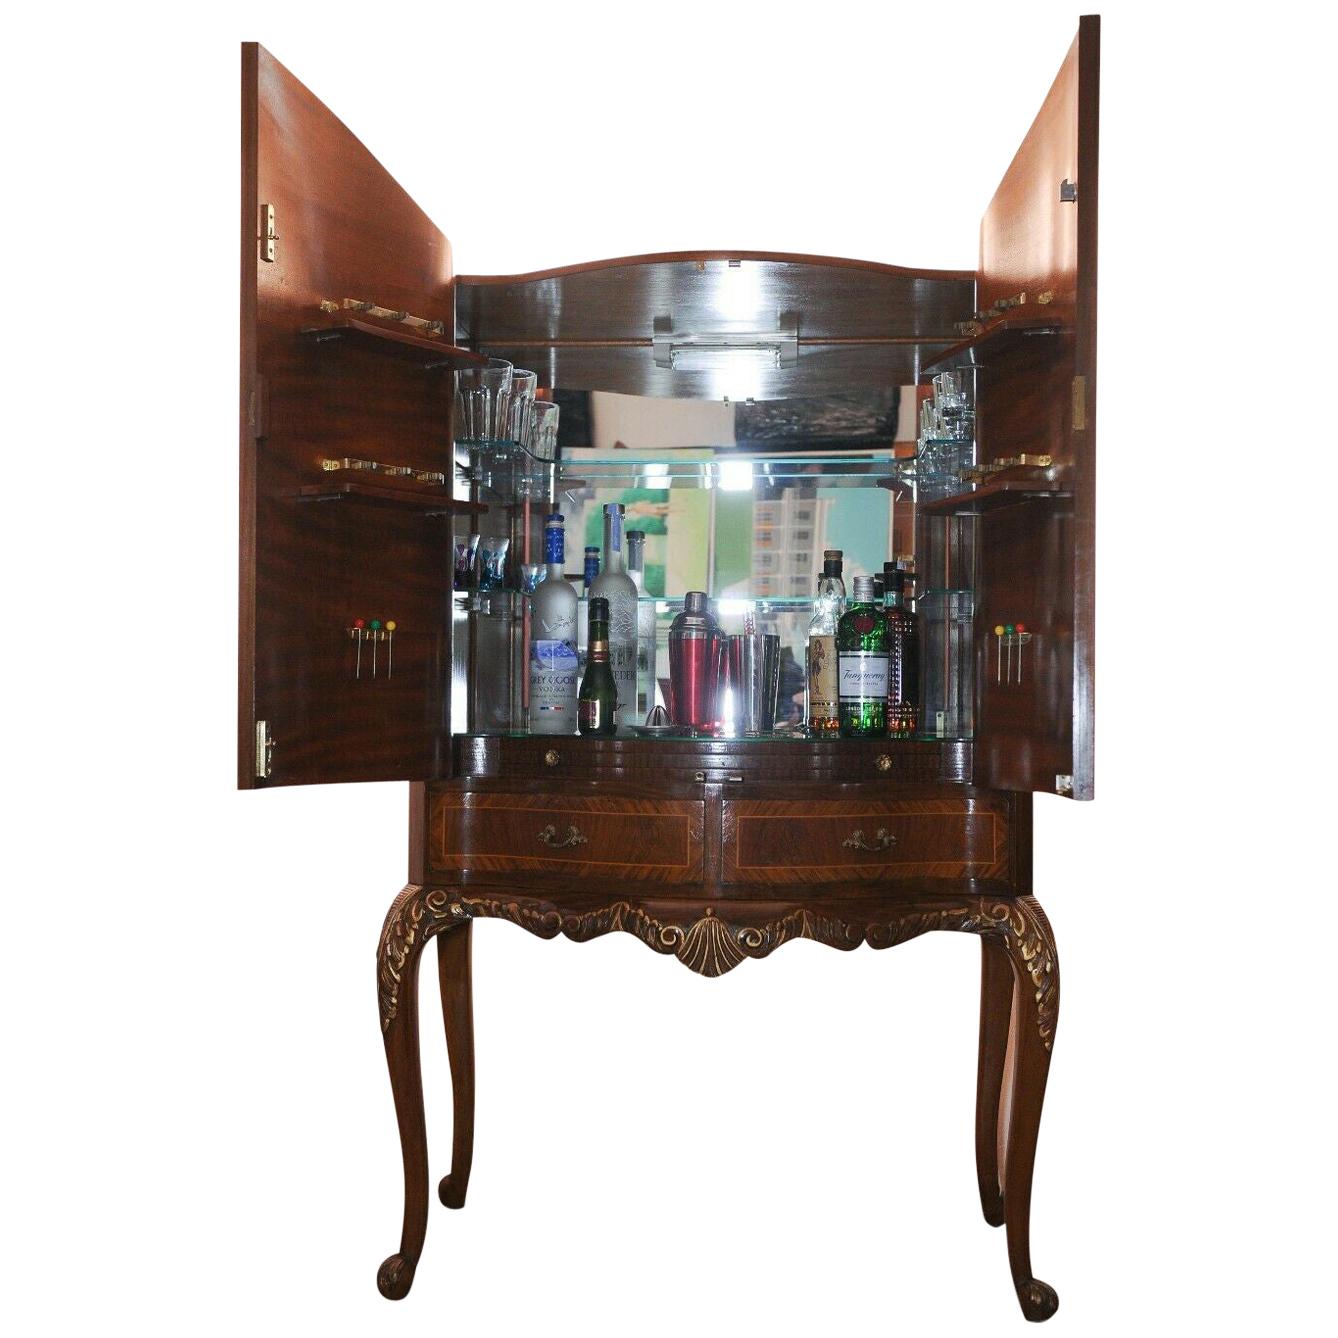 Exquisite Harry & Lou Epstein British custom made marquetry cocktail cabinet. To reveal mirrored interior drinks bar

Custom made piece by the famed London cabinet makers - 

Epstein furniture was originally founded in East London by Polish